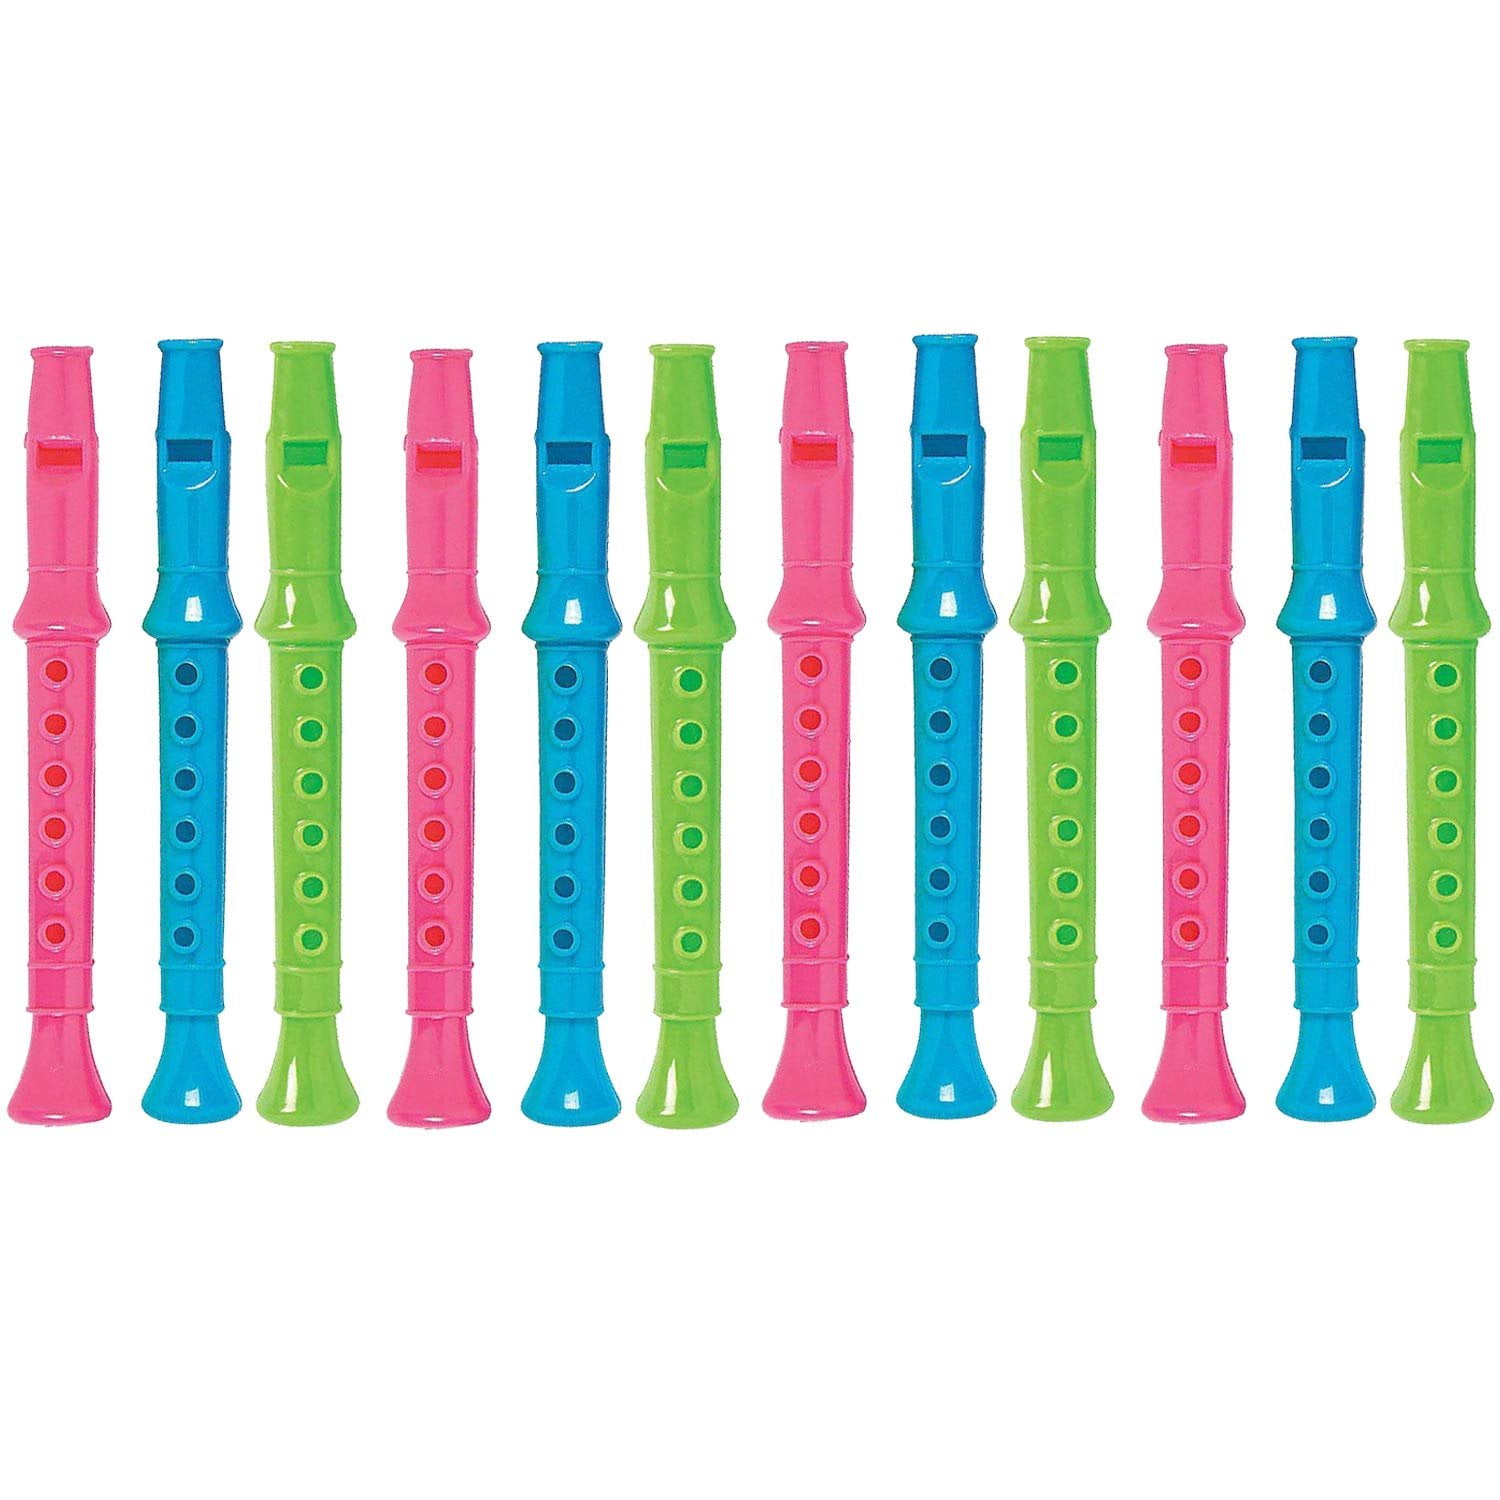 12 x MINI FLUTES WHISTLE RECORDER TOY BOYS GIRL FAVOR BIRTHDAY PARTY BAG FILLERS 